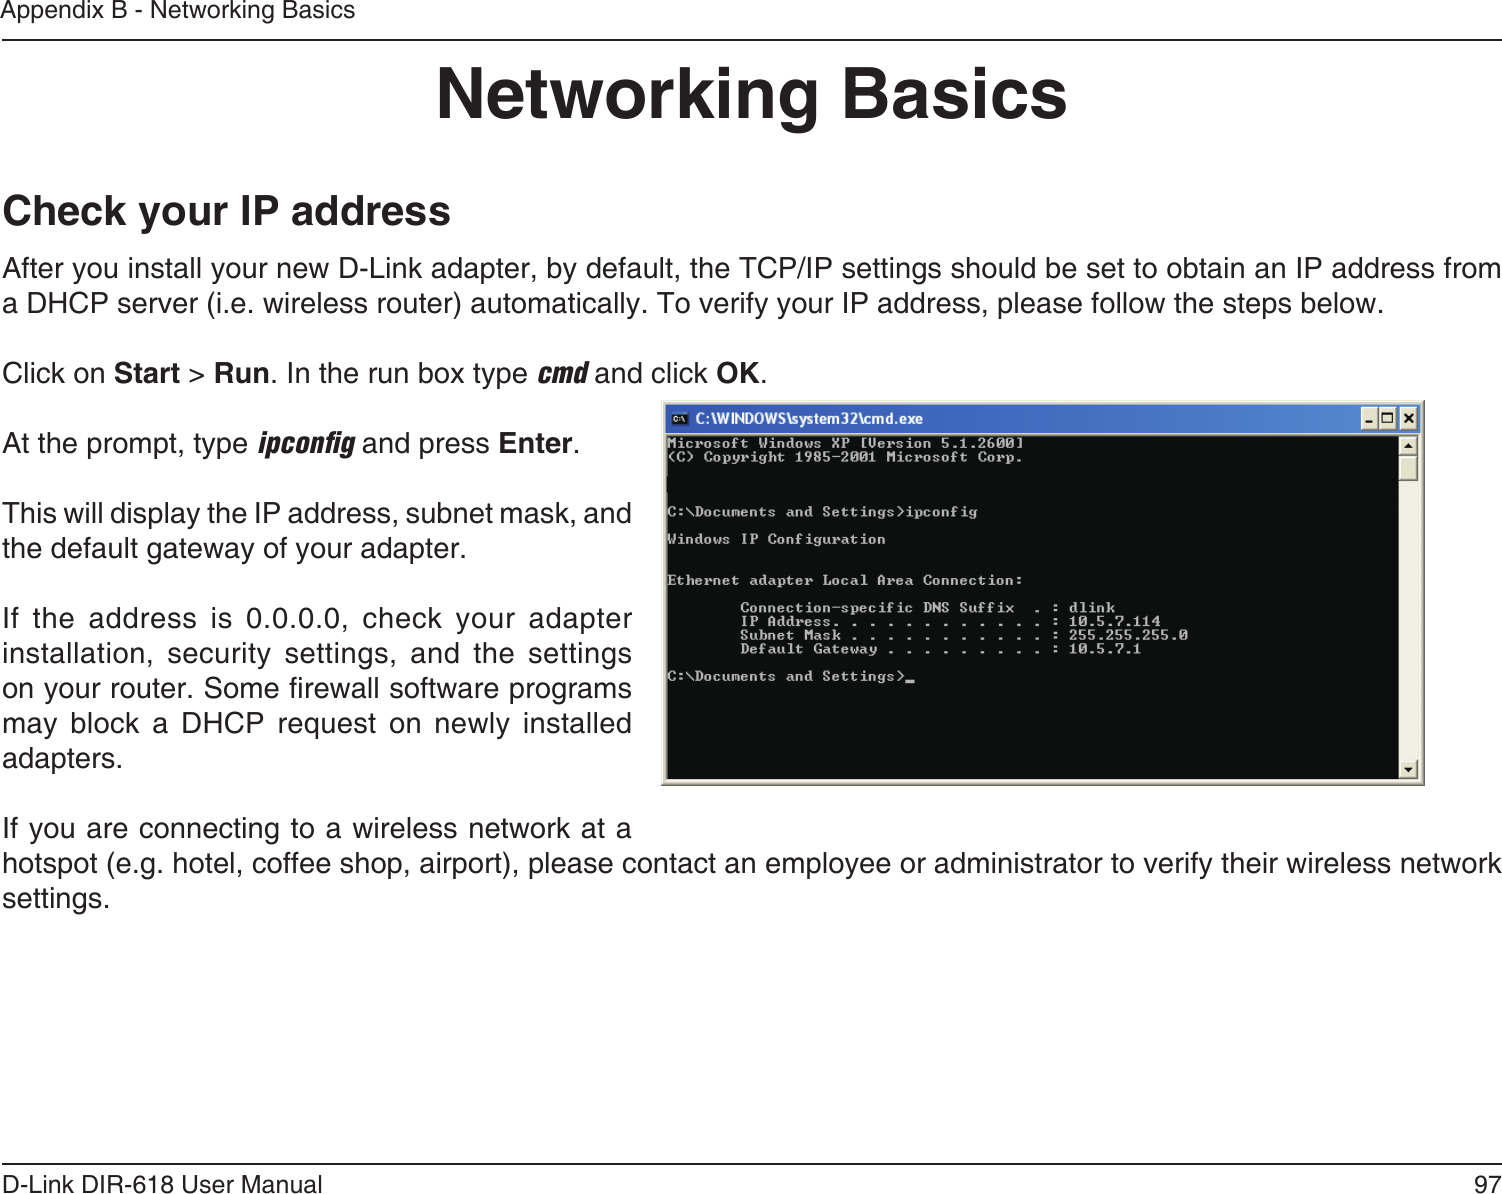 97D-Link DIR-618 User ManualAppendix B - Networking BasicsNetworking BasicsCheck your IP addressAfter you install your new D-Link adapter, by default, the TCP/IP settings should be set to obtain an IP address from a DHCP server (i.e. wireless router) automatically. To verify your IP address, please follow the steps below.Click on Start &gt; Run. In the run box type cmd and click OK.At the prompt, type ipconﬁg and press Enter.This will display the IP address, subnet mask, and the default gateway of your adapter.If the address is 0.0.0.0, check your adapter installation, security settings, and the settings on your router. Some rewall software programs may  block  a  DHCP  request  on  newly  installedadapters. If you are connecting to a wireless network at a hotspot (e.g. hotel, coffee shop, airport), please contact an employee or administrator to verify their wireless network settings.